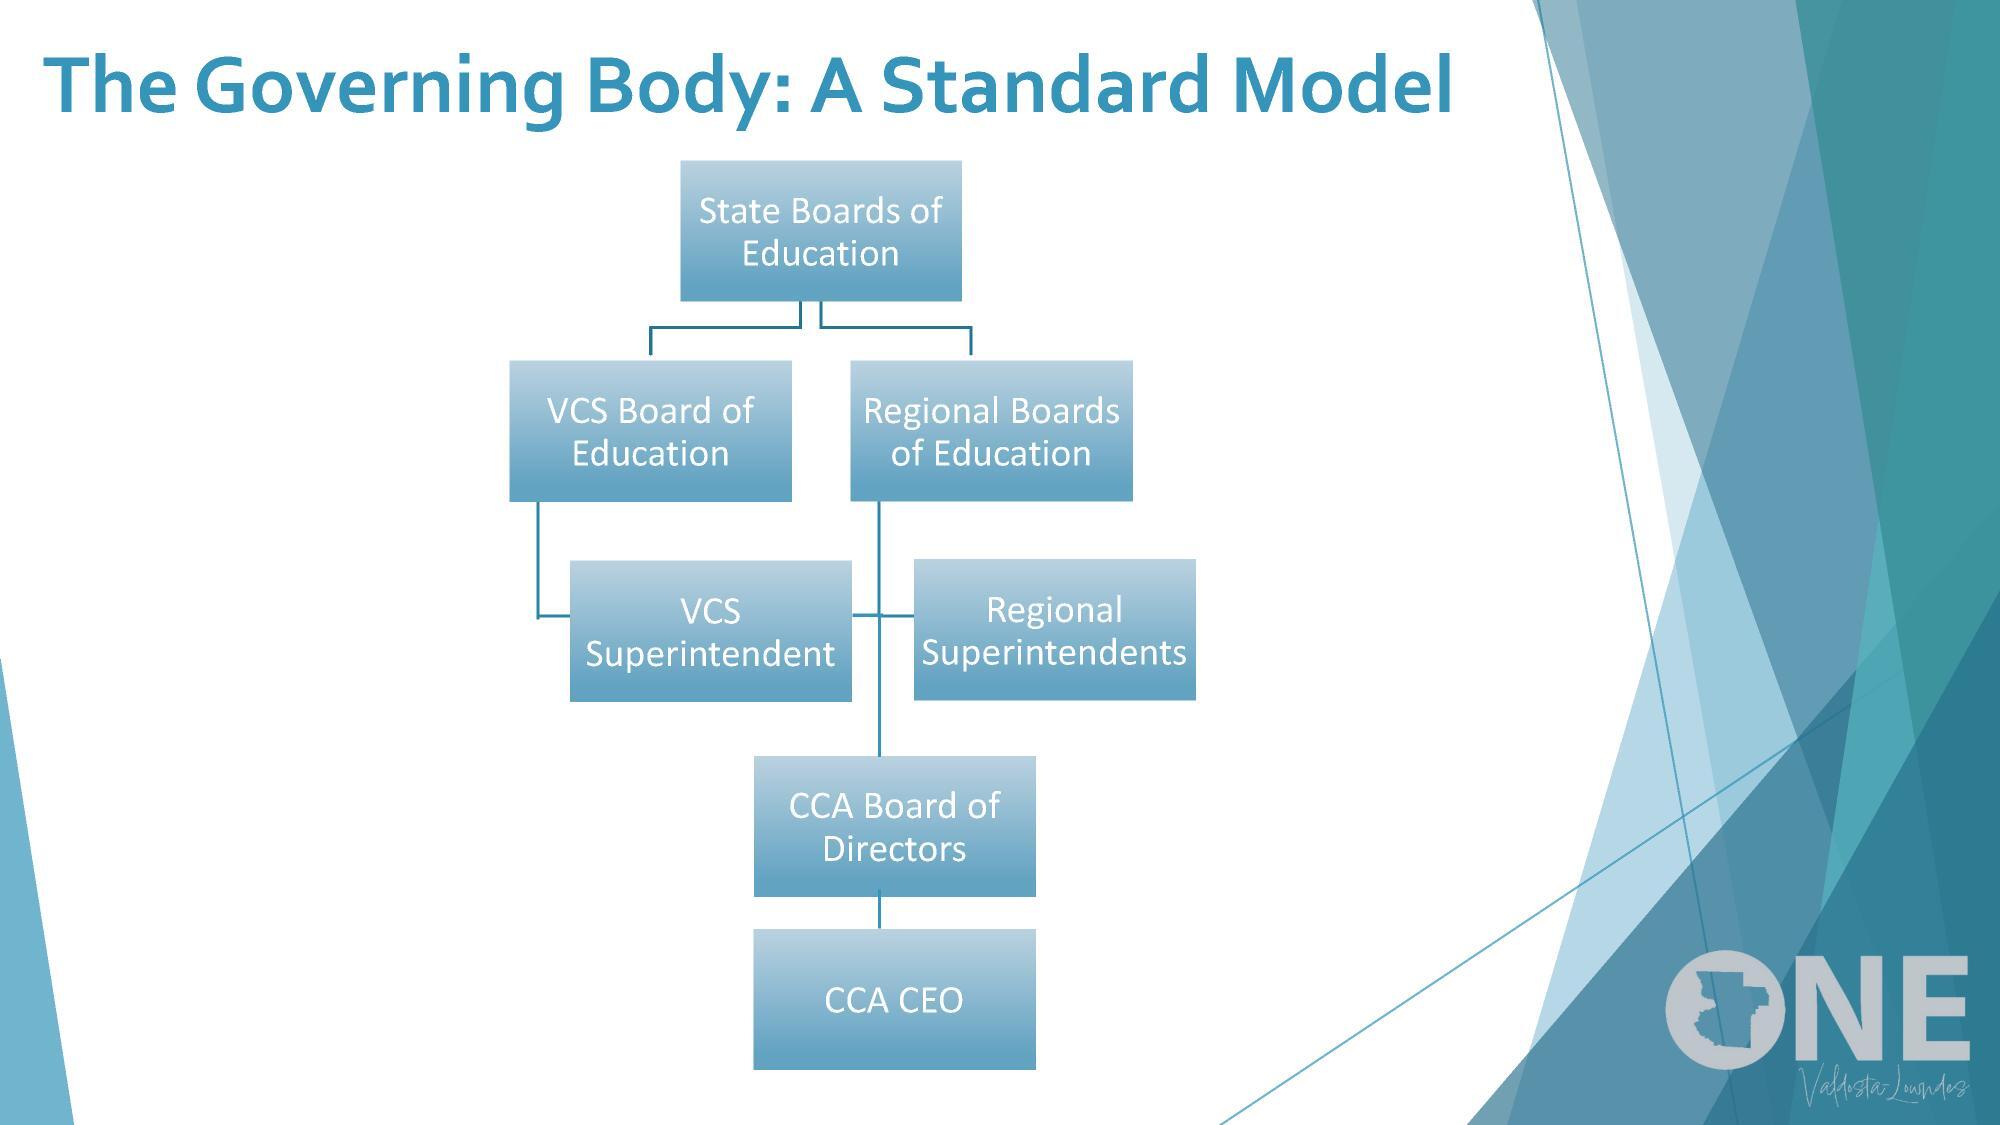 The Governing Body: A Standard Model